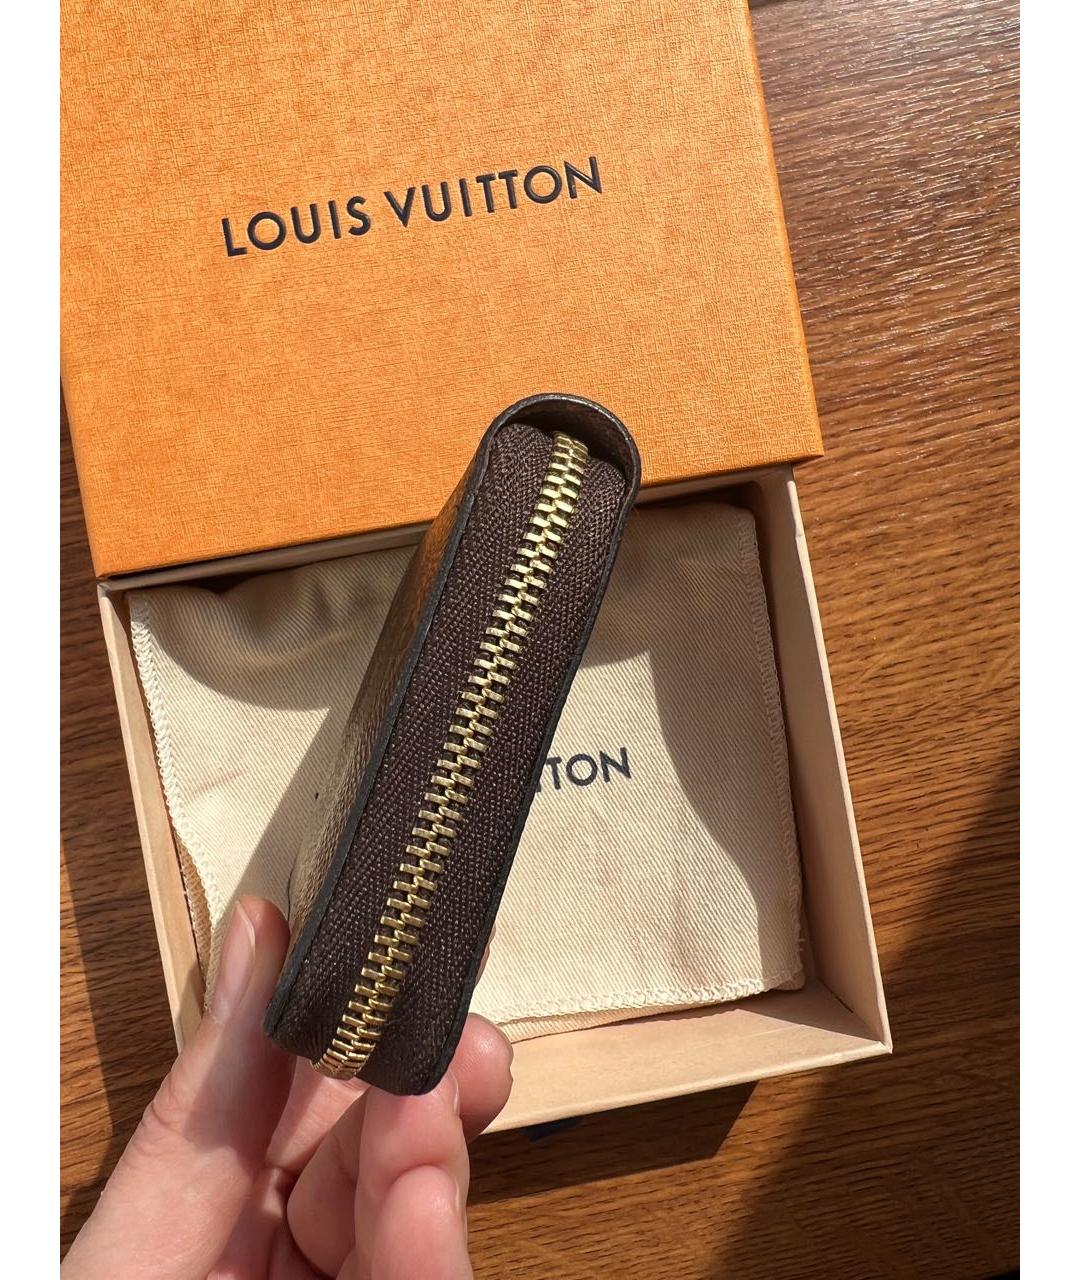 LOUIS VUITTON PRE-OWNED Мульти кошелек, фото 5